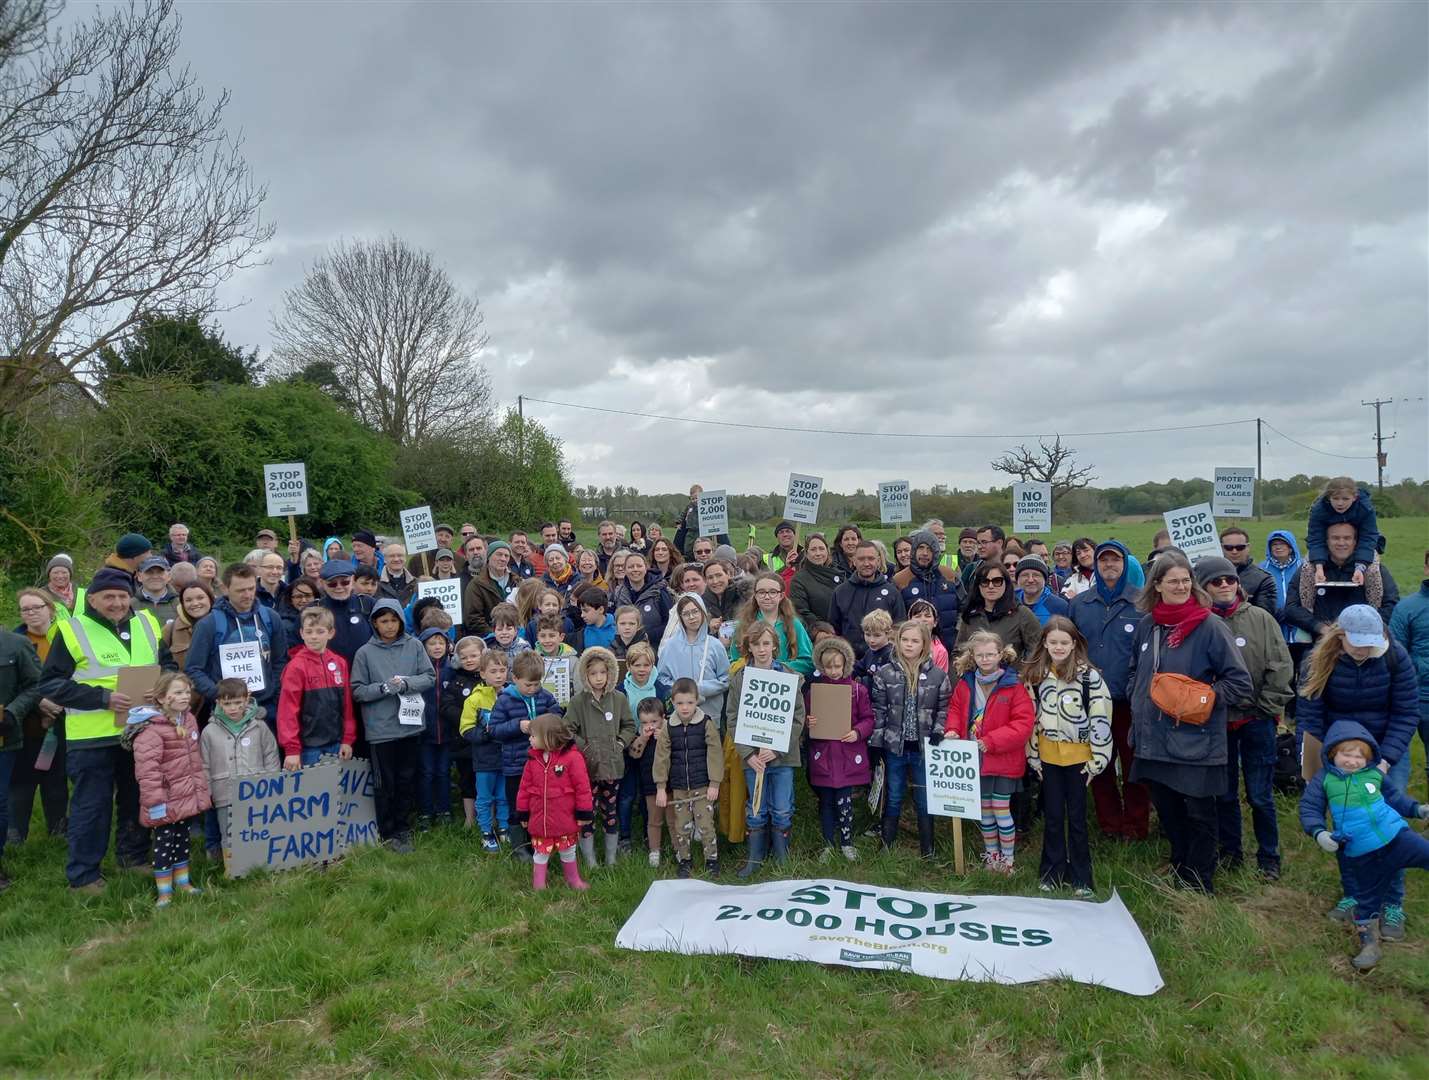 Protesters opposed to the 2,000 homes proposed for land in Blean - a key part of Canterbury City Council's draft local plan